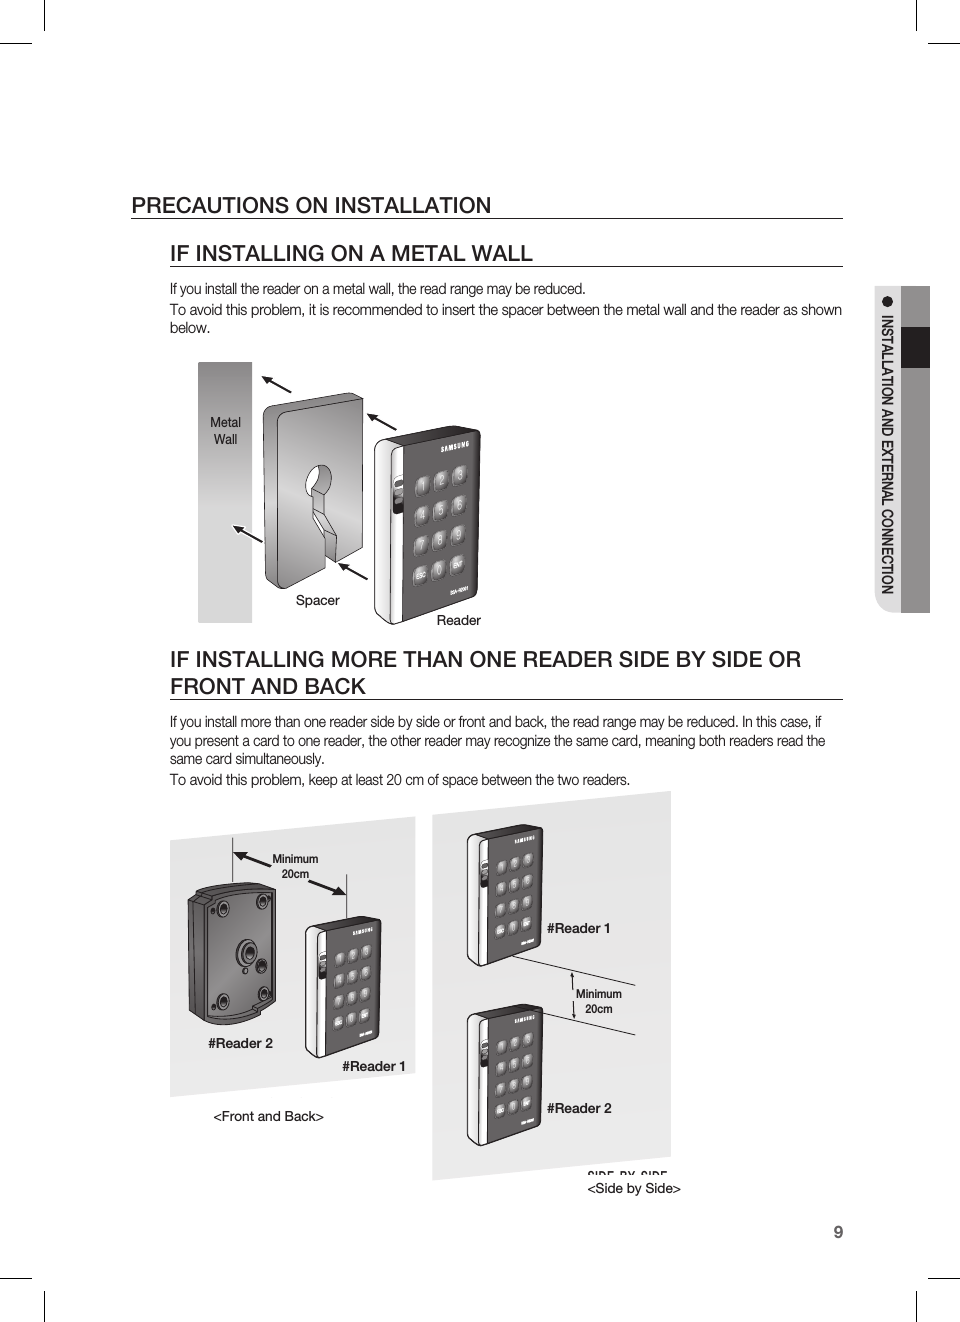 English9INSTALLATION AND EXTERNAL CONNECTIONPRECAUTIONS ON INSTALLATIONIF INSTALLING ON A METAL WALLIf you install the reader on a metal wall, the read range may be reduced.To avoid this problem, it is recommended to insert the spacer between the metal wall and the reader as shown below.IF INSTALLING MORE THAN ONE READER SIDE BY SIDE OR FRONT AND BACKIf you install more than one reader side by side or front and back, the read range may be reduced. In this case, if you present a card to one reader, the other reader may recognize the same card, meaning both readers read the same card simultaneously.To avoid this problem, keep at least 20 cm of space between the two readers.zzhTyYWWXXYZ[\]^_`lzj lu{WSpacerReaderMetal WallBACK TO BACKINSTALLATIONSIDE BY SIDEINSTALLATIONzzhTyYWWXXYZ[\]^_`lzj lu{WzzhTyYWWXXYZ[\]^_`lzj lu{WzzhTyYWWXXYZ[\]^_`lzj lu{W&lt;Front and Back&gt;&lt;Side by Side&gt;Minimum 20cmMinimum 20cm#Reader 1#Reader 2#Reader 1#Reader 2